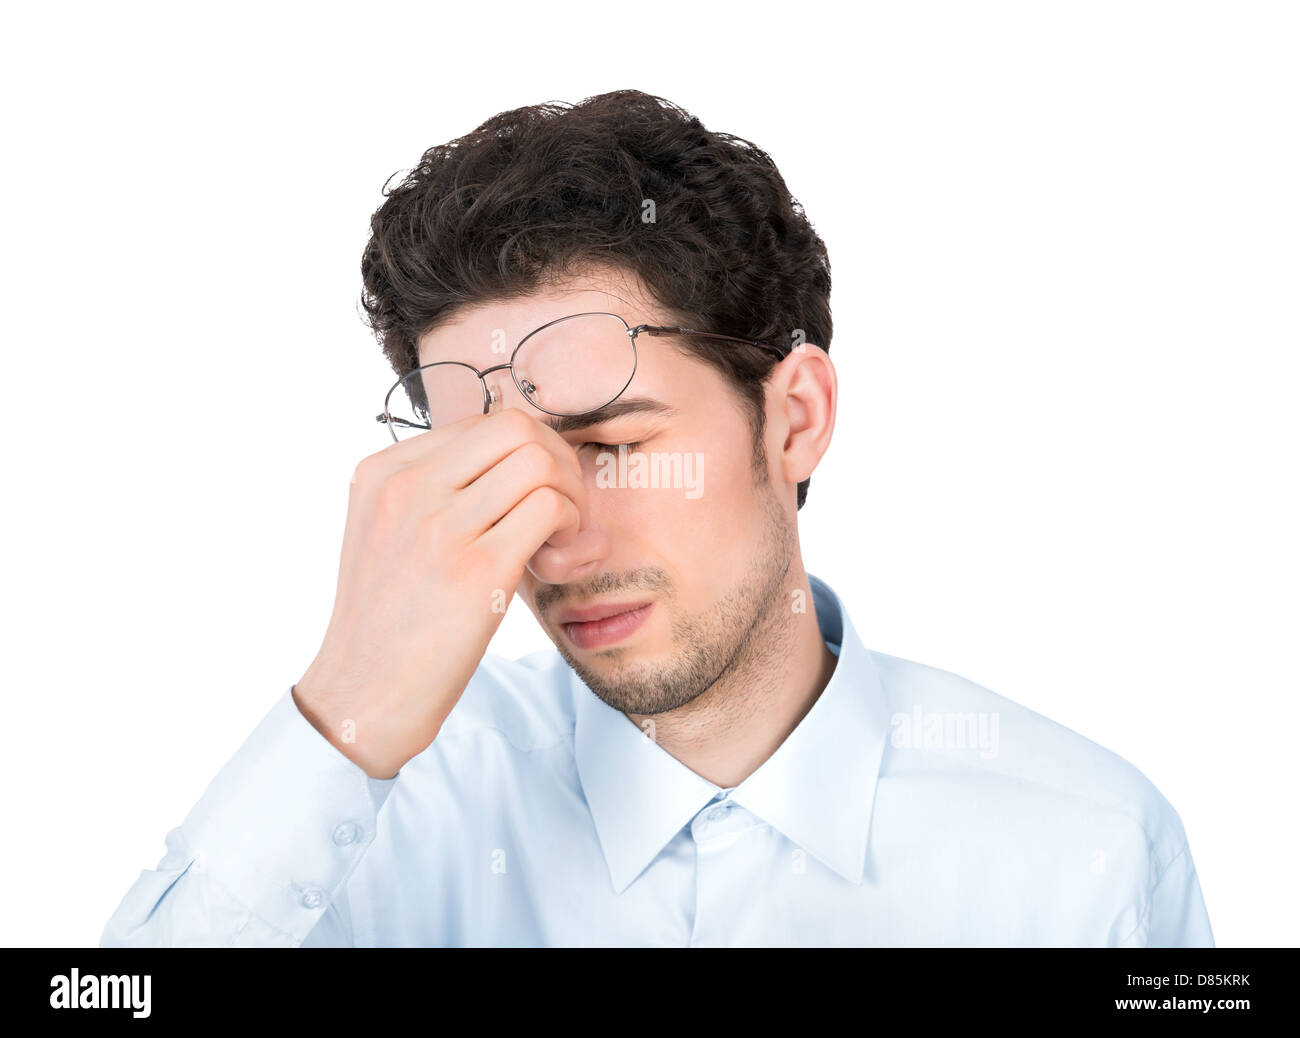 Handsome young businessman showing tired or headache gesture. Isolated on white background. Stock Photo